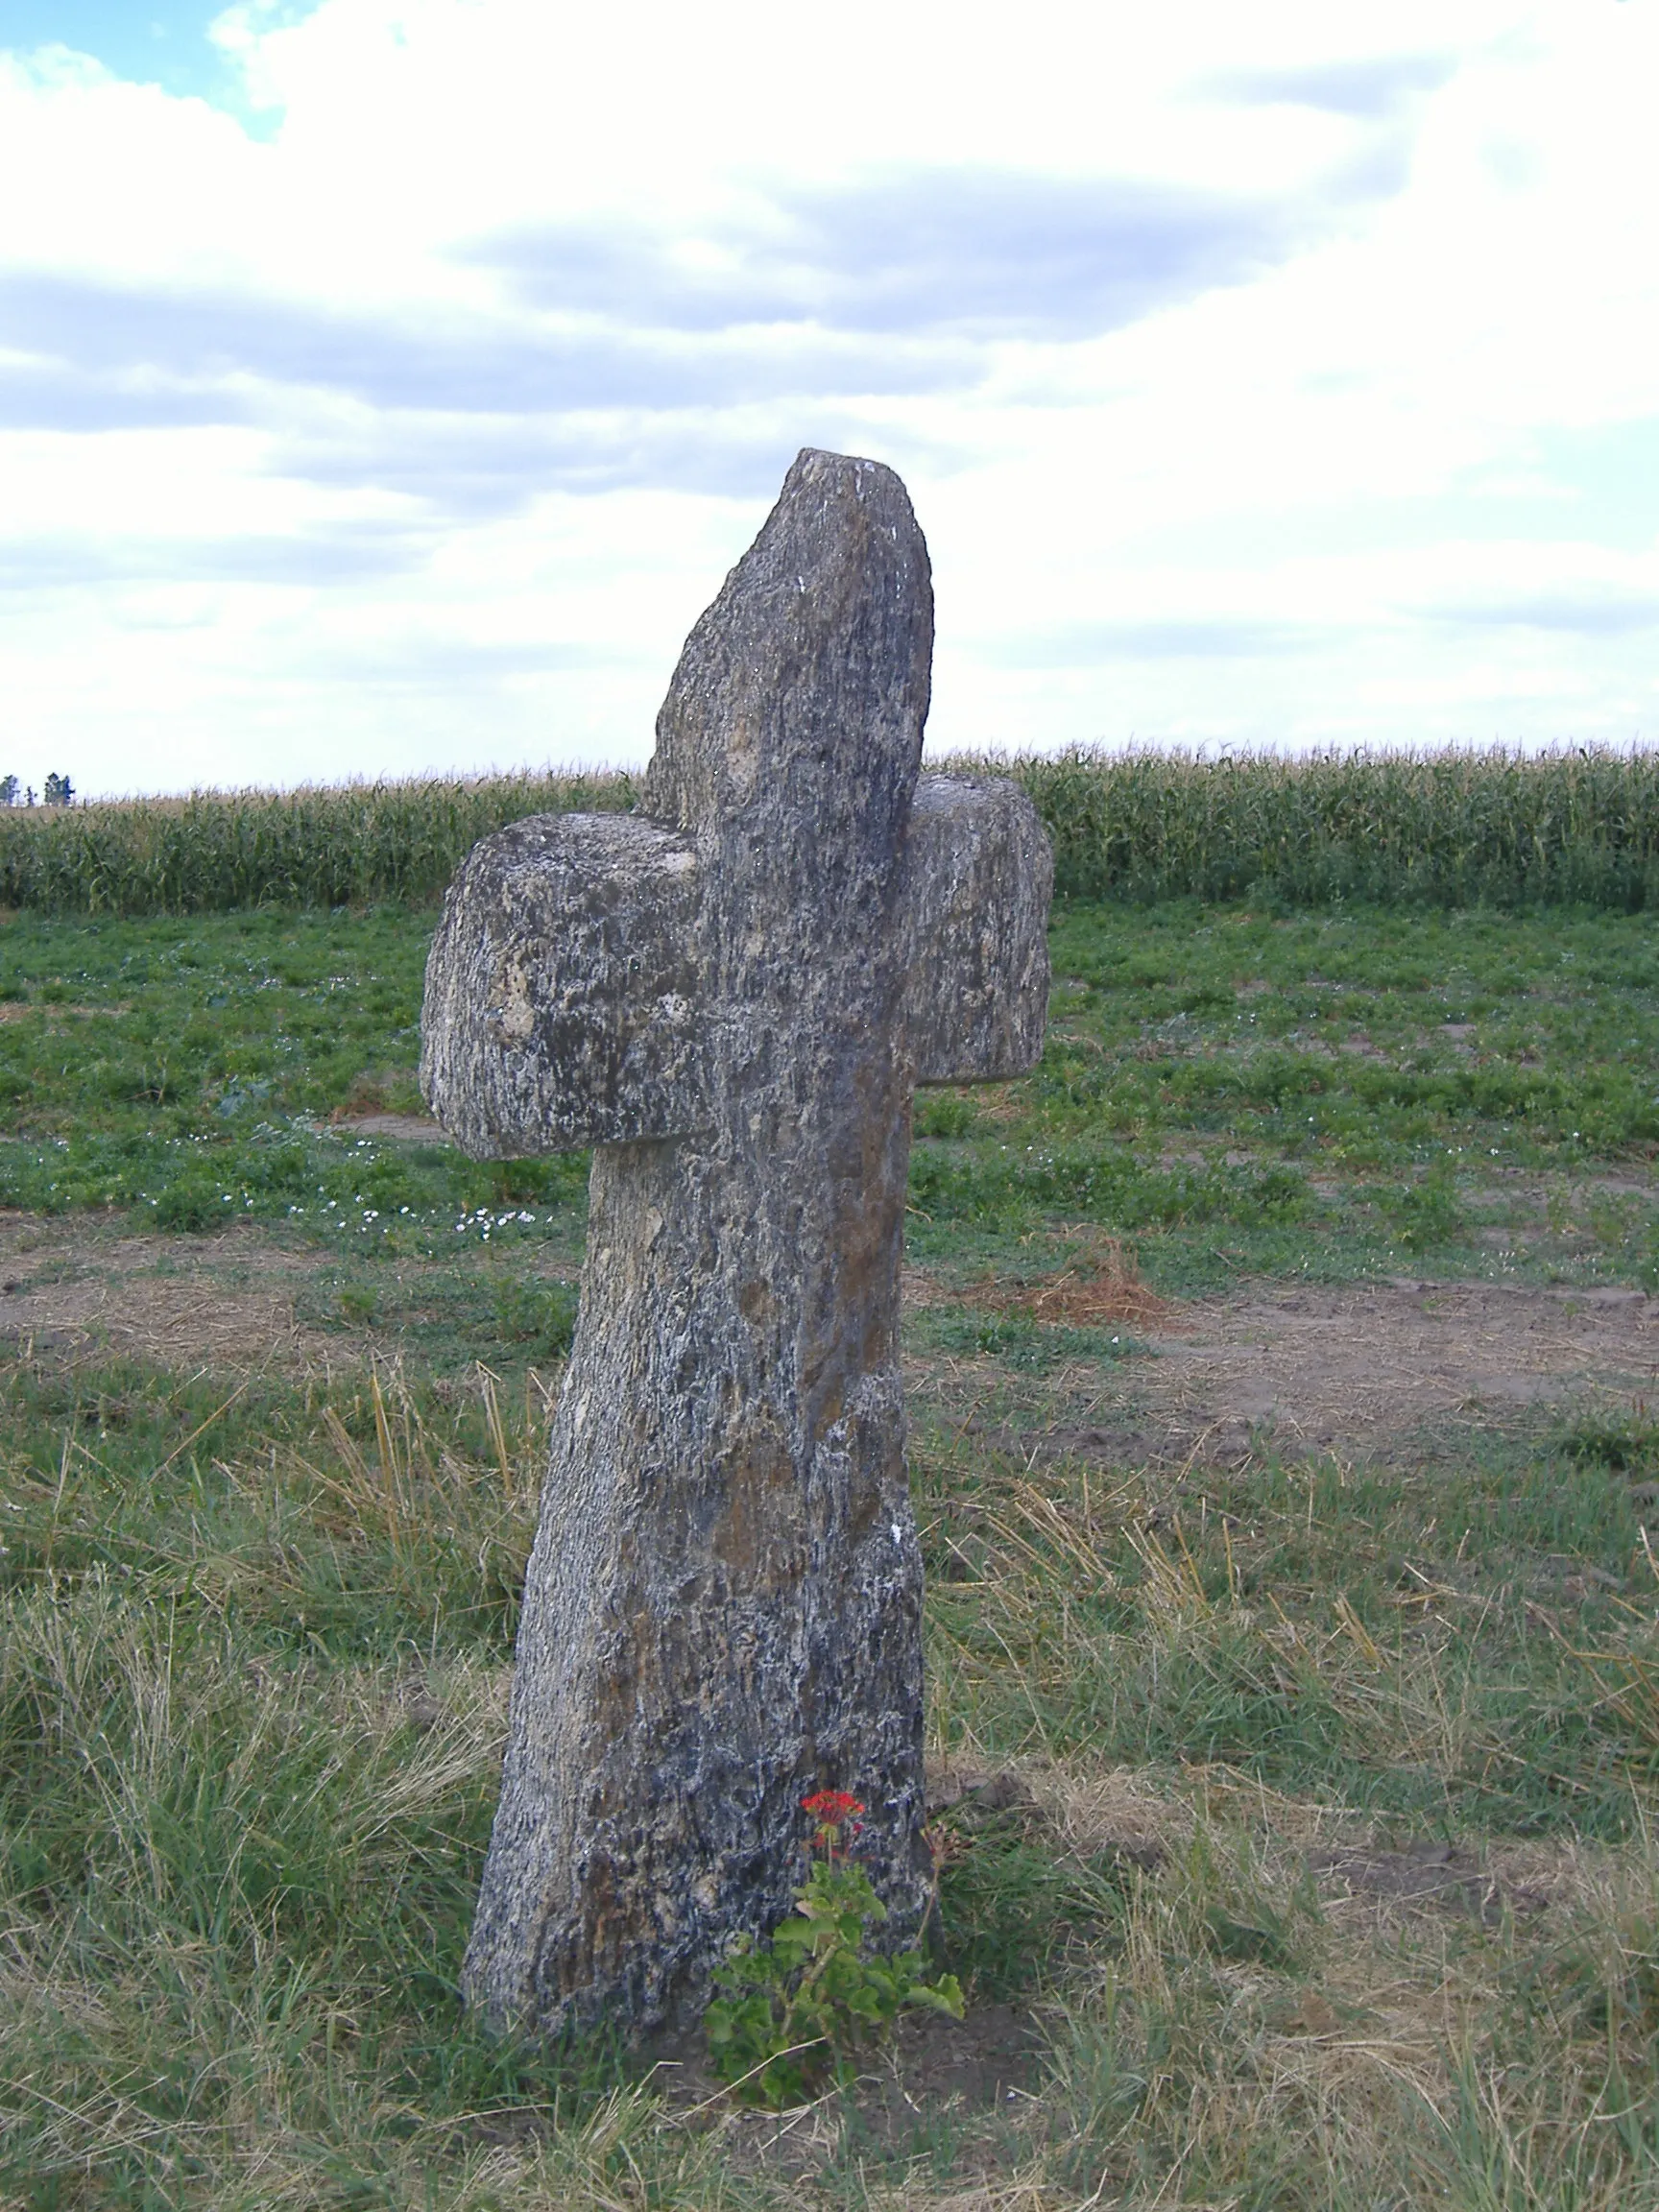 Photo showing: Kunkereszt ("Cuman cross") in Belez, periphery of Magyarcsanád, Hungary. According to local legends it is claimed to be the cross of Ladislaus IV of Hungary, altought sources show this cross marks the place, where György Dózsa killed the bishop of Csanád diocese.